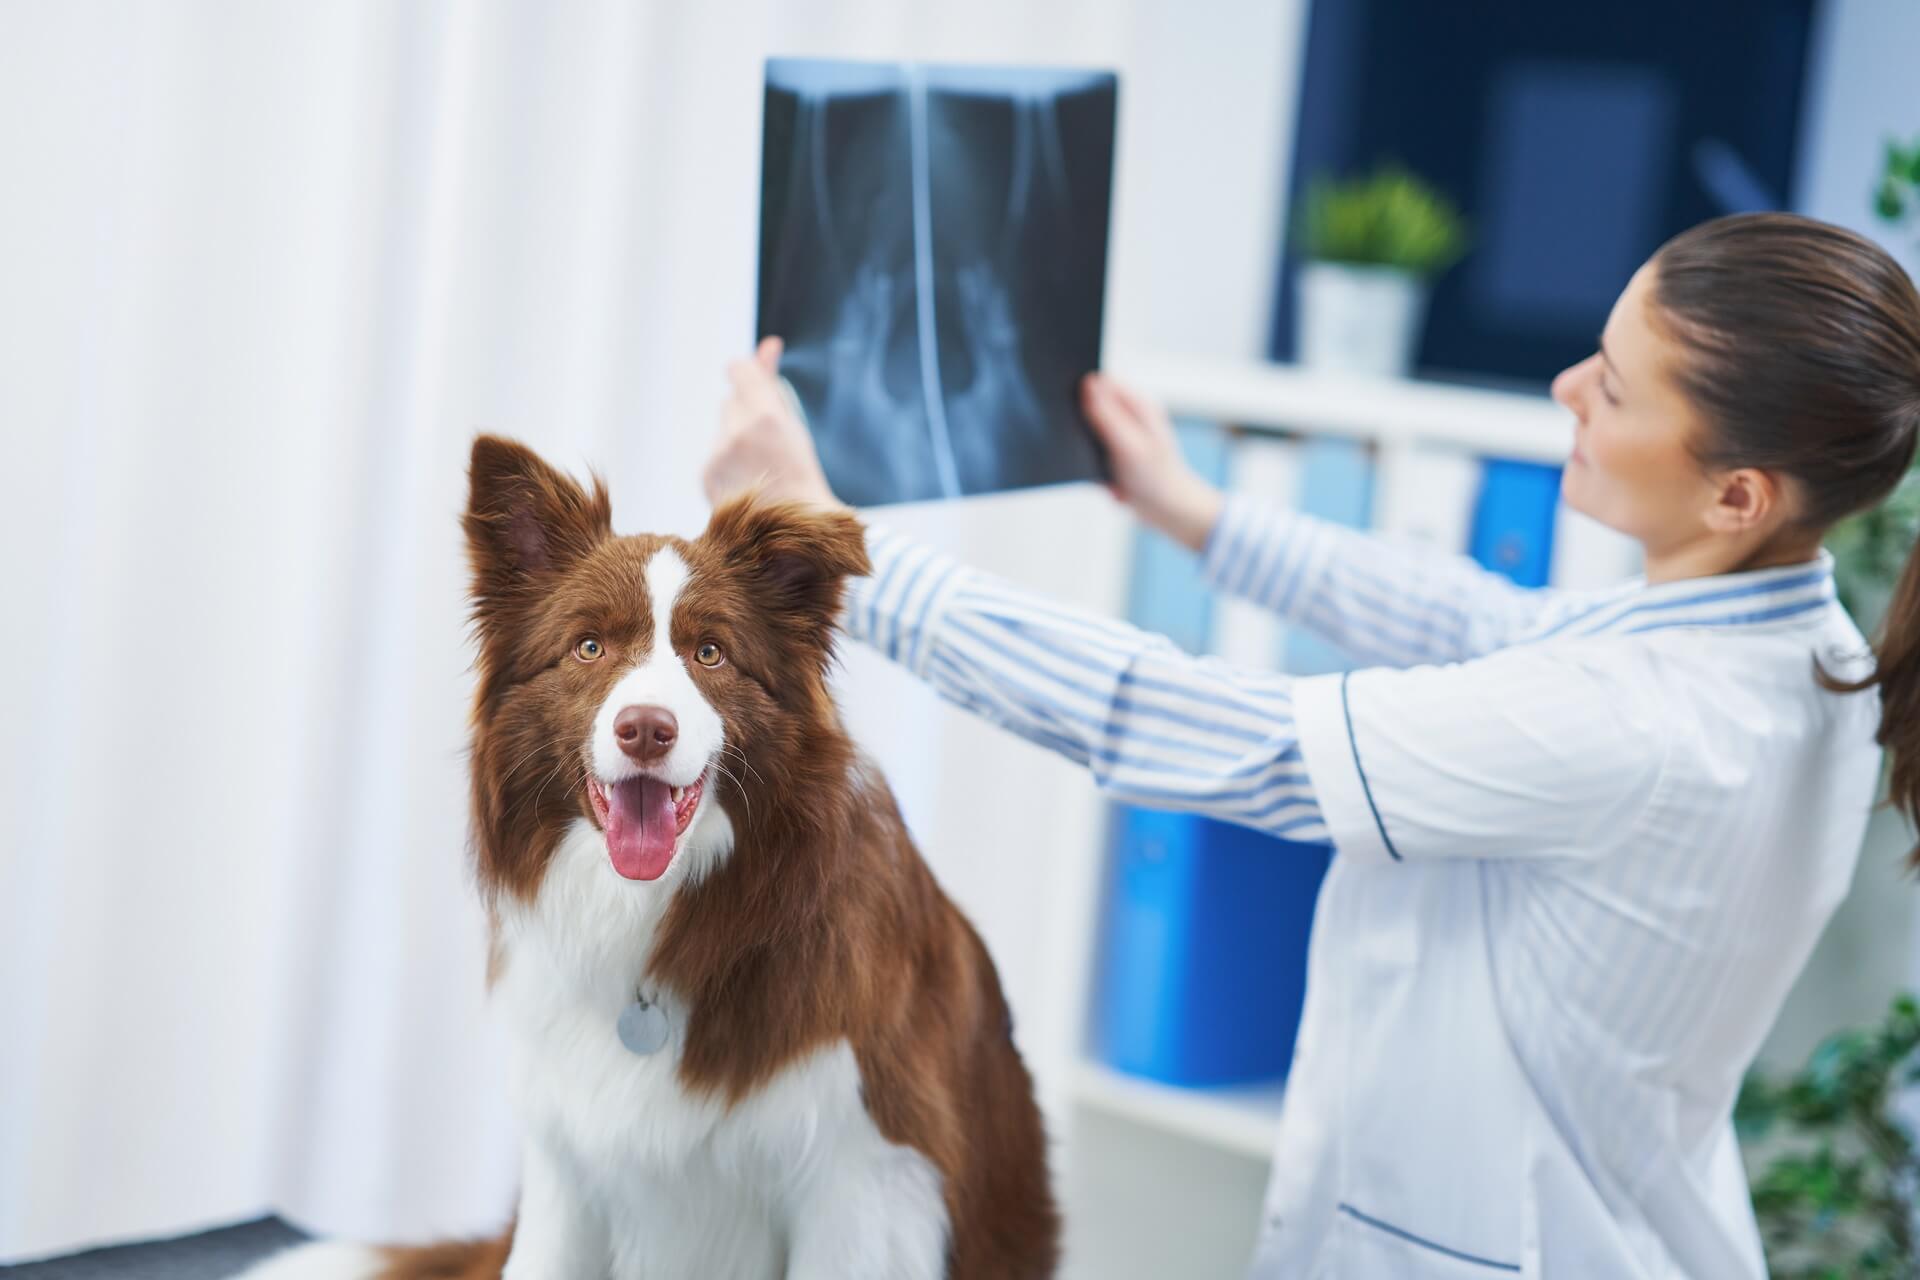 Happy brown and white dog looking straight ahead while vet examines x-ray in background